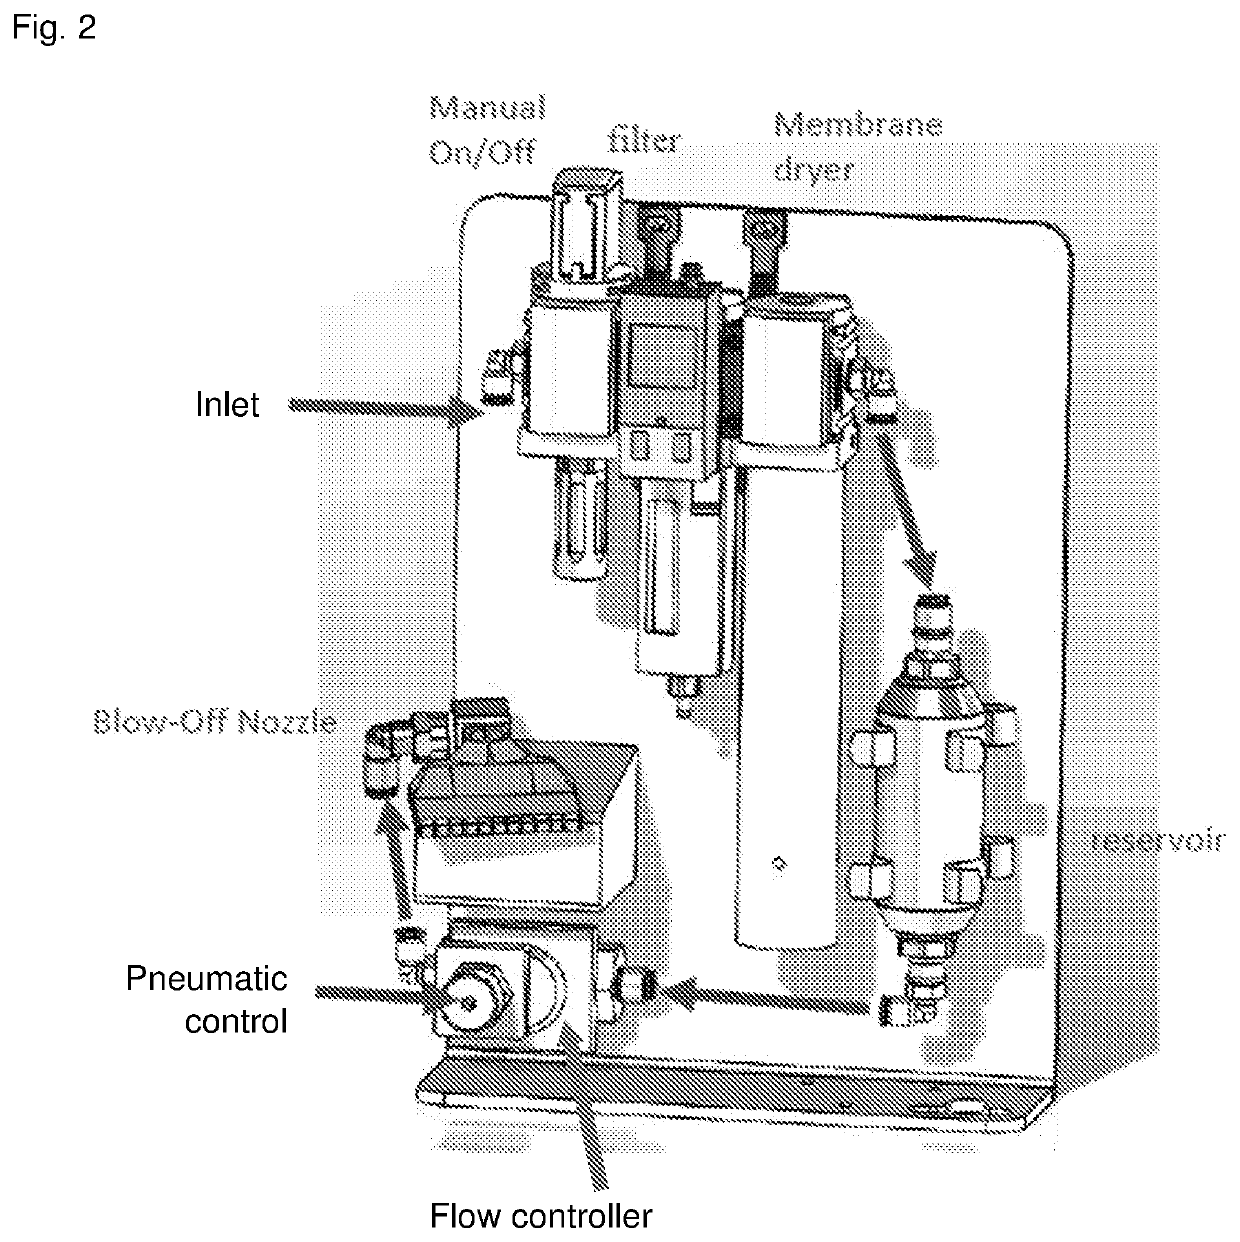 Use of clean and dry gas for particle removal and assembly therefor